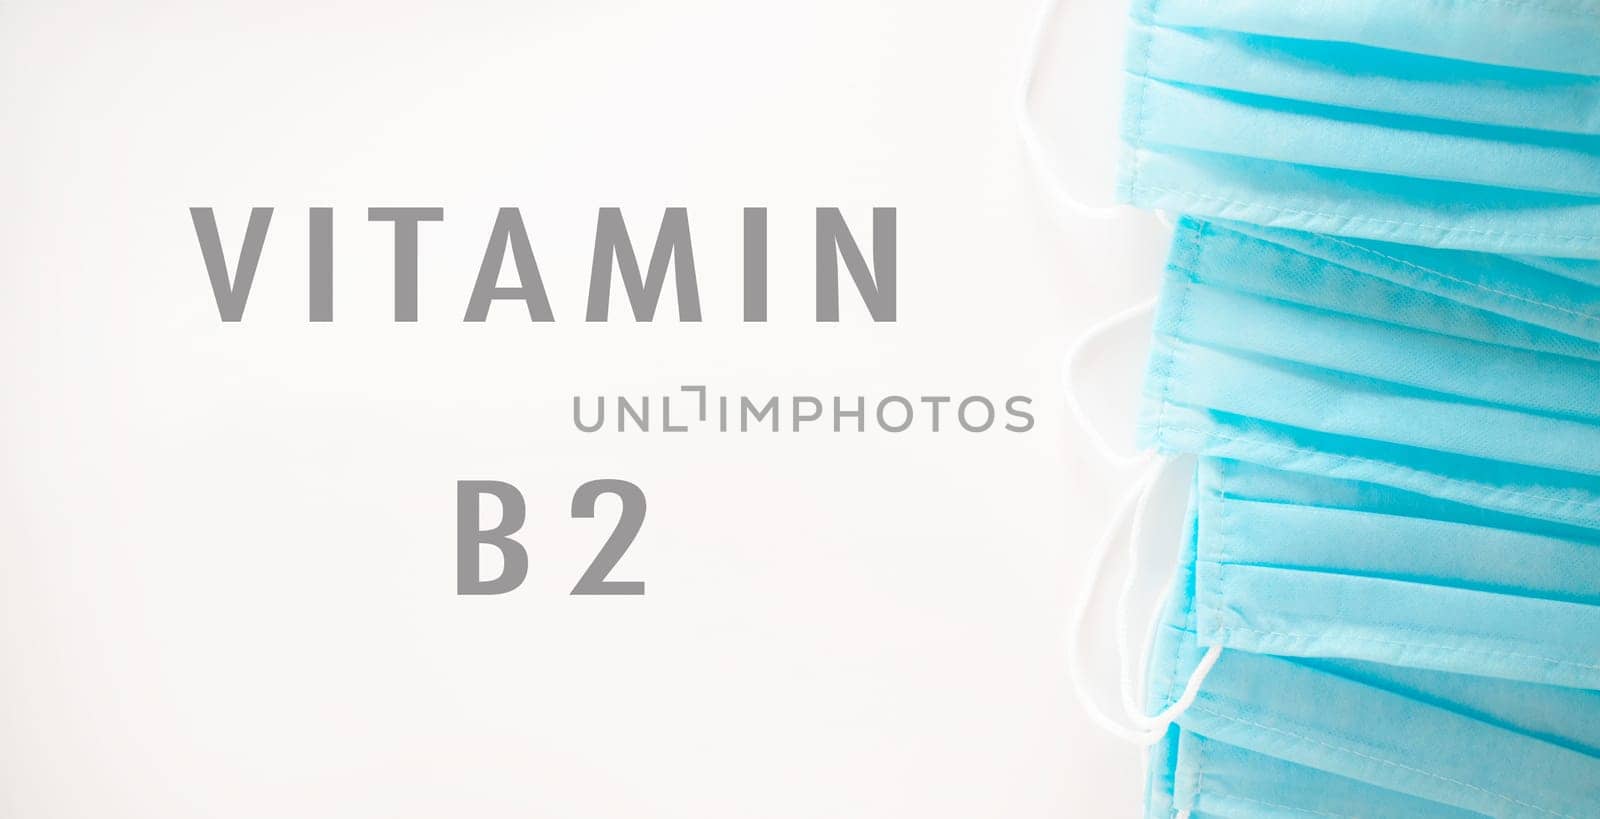 A blue stack of surgical masks with the word vitamin B2 written underneath. Concept of caution and protection, as the masks are used in medical settings to prevent the spread of germs and viruses